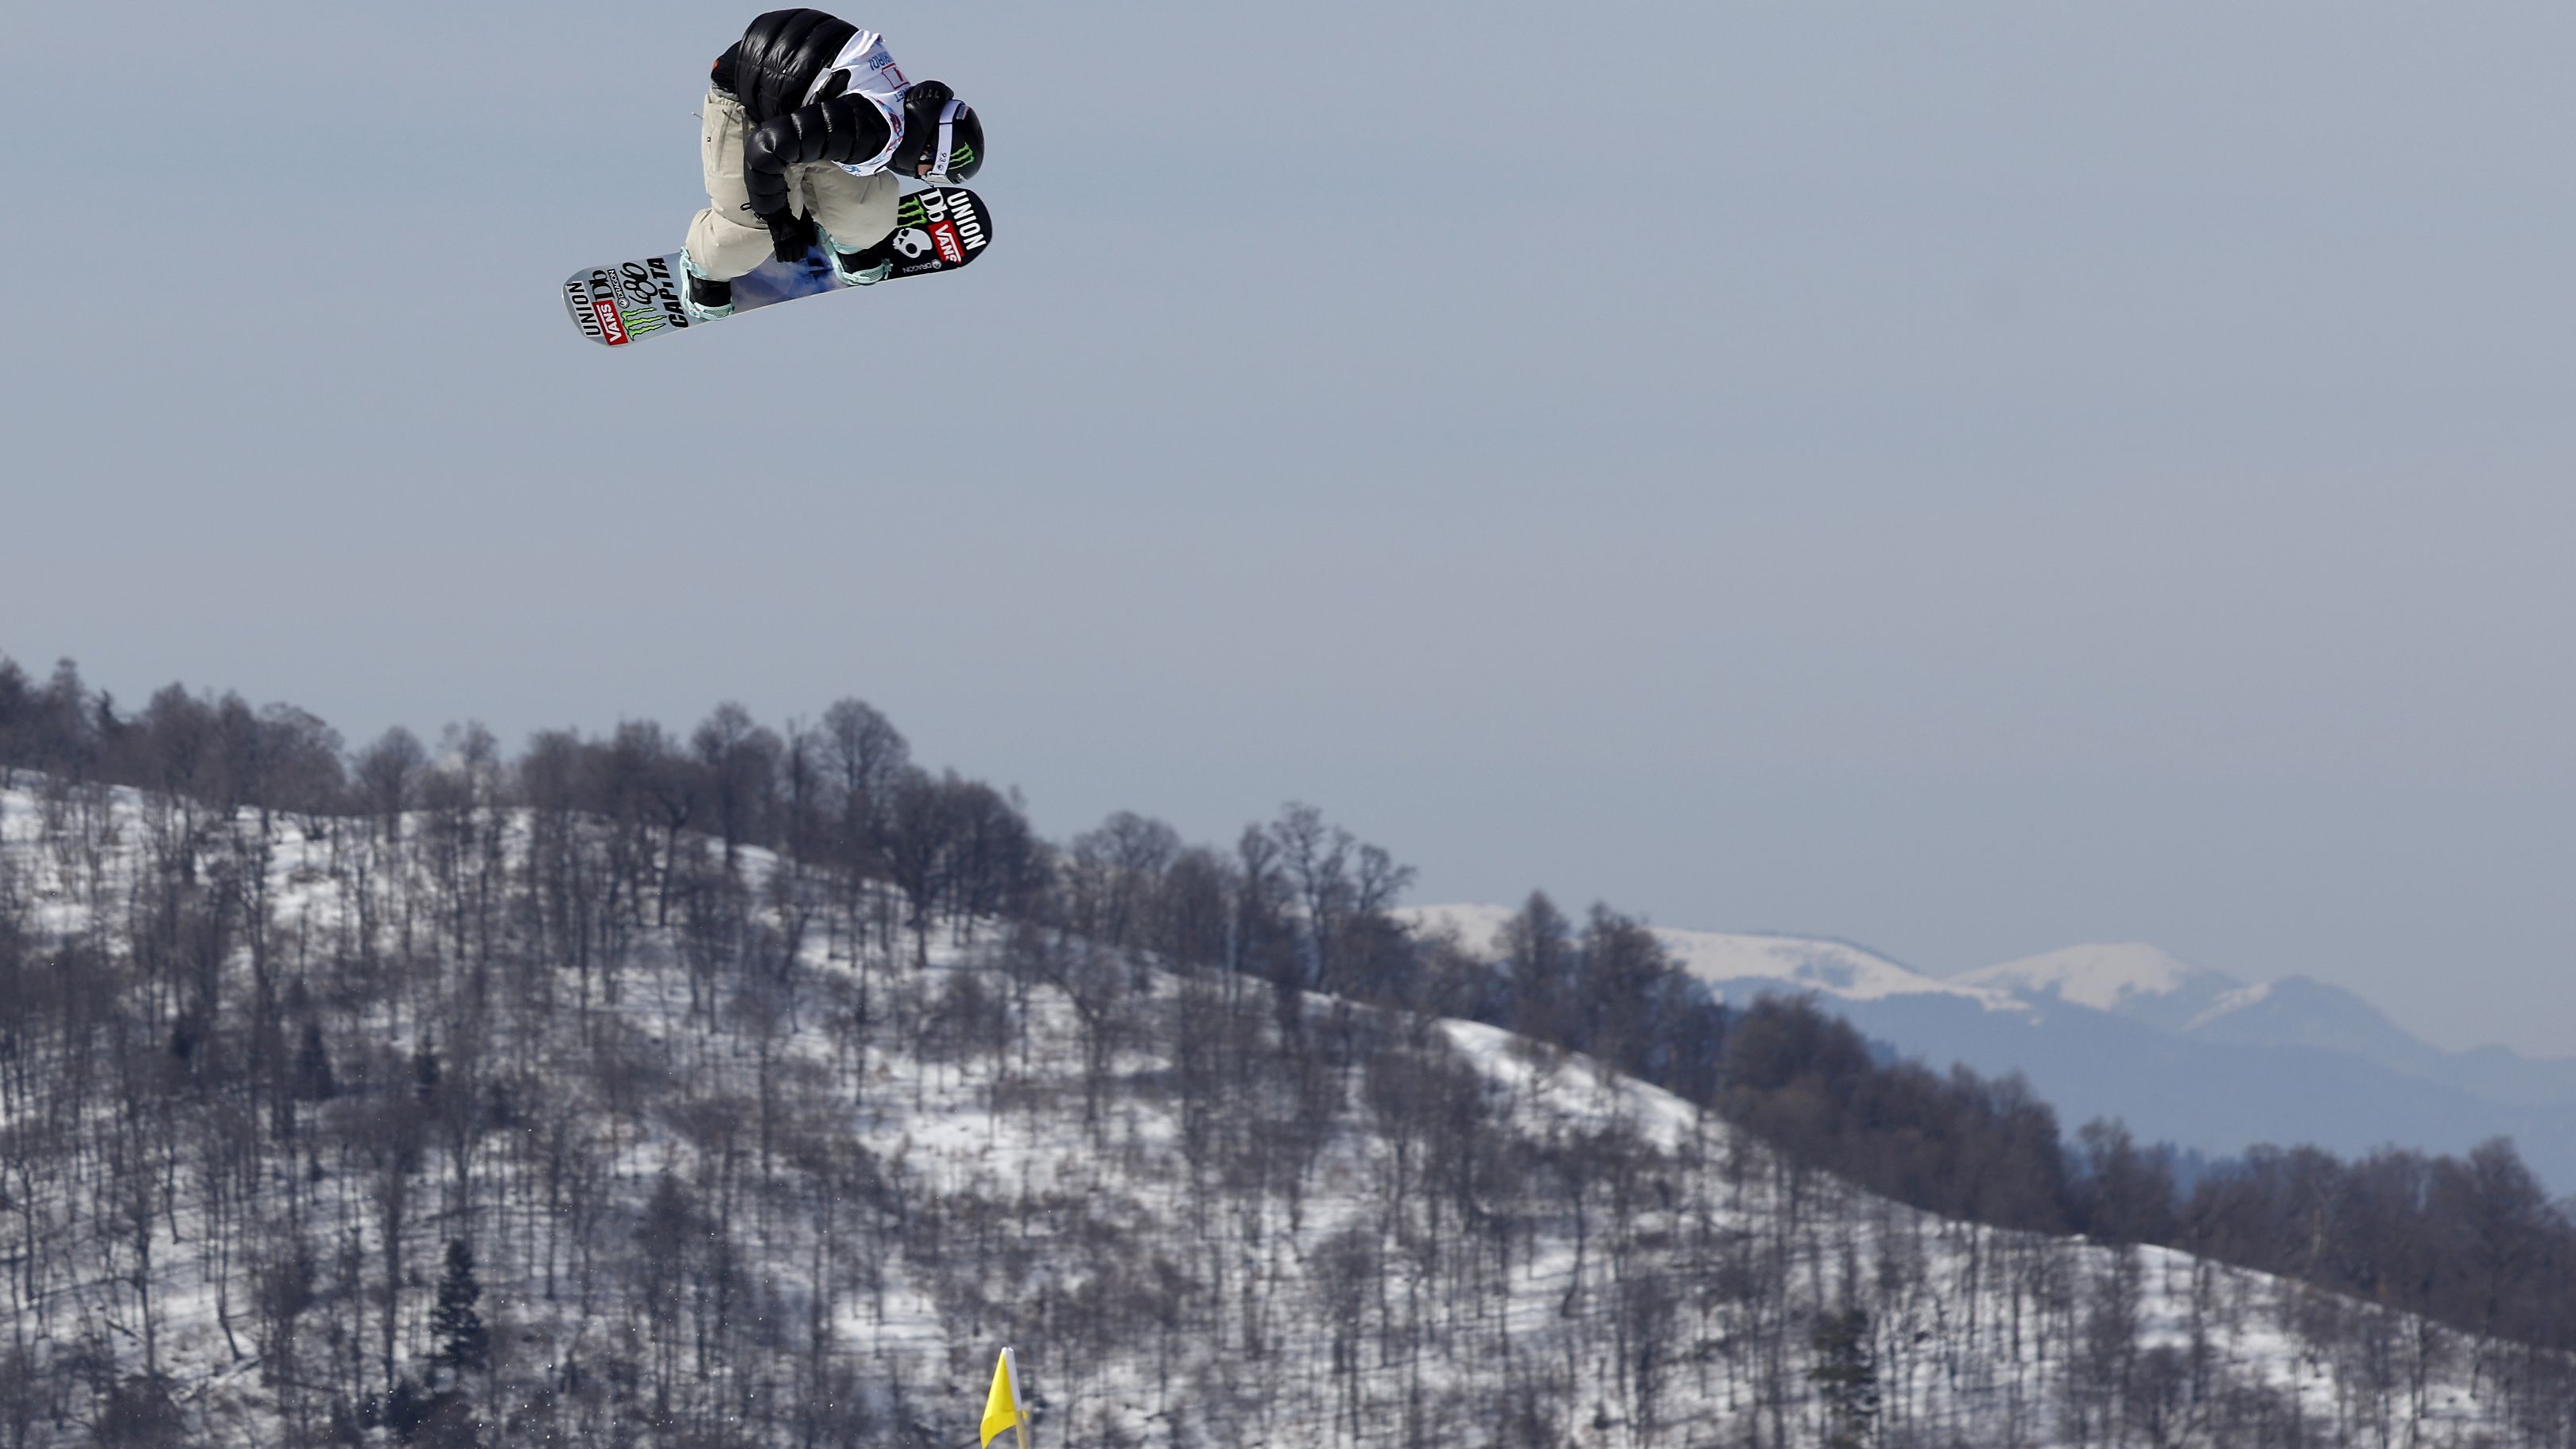 Mia Brookes wins the gold medal during the FIS Snowboard World Championships slopestyle event.